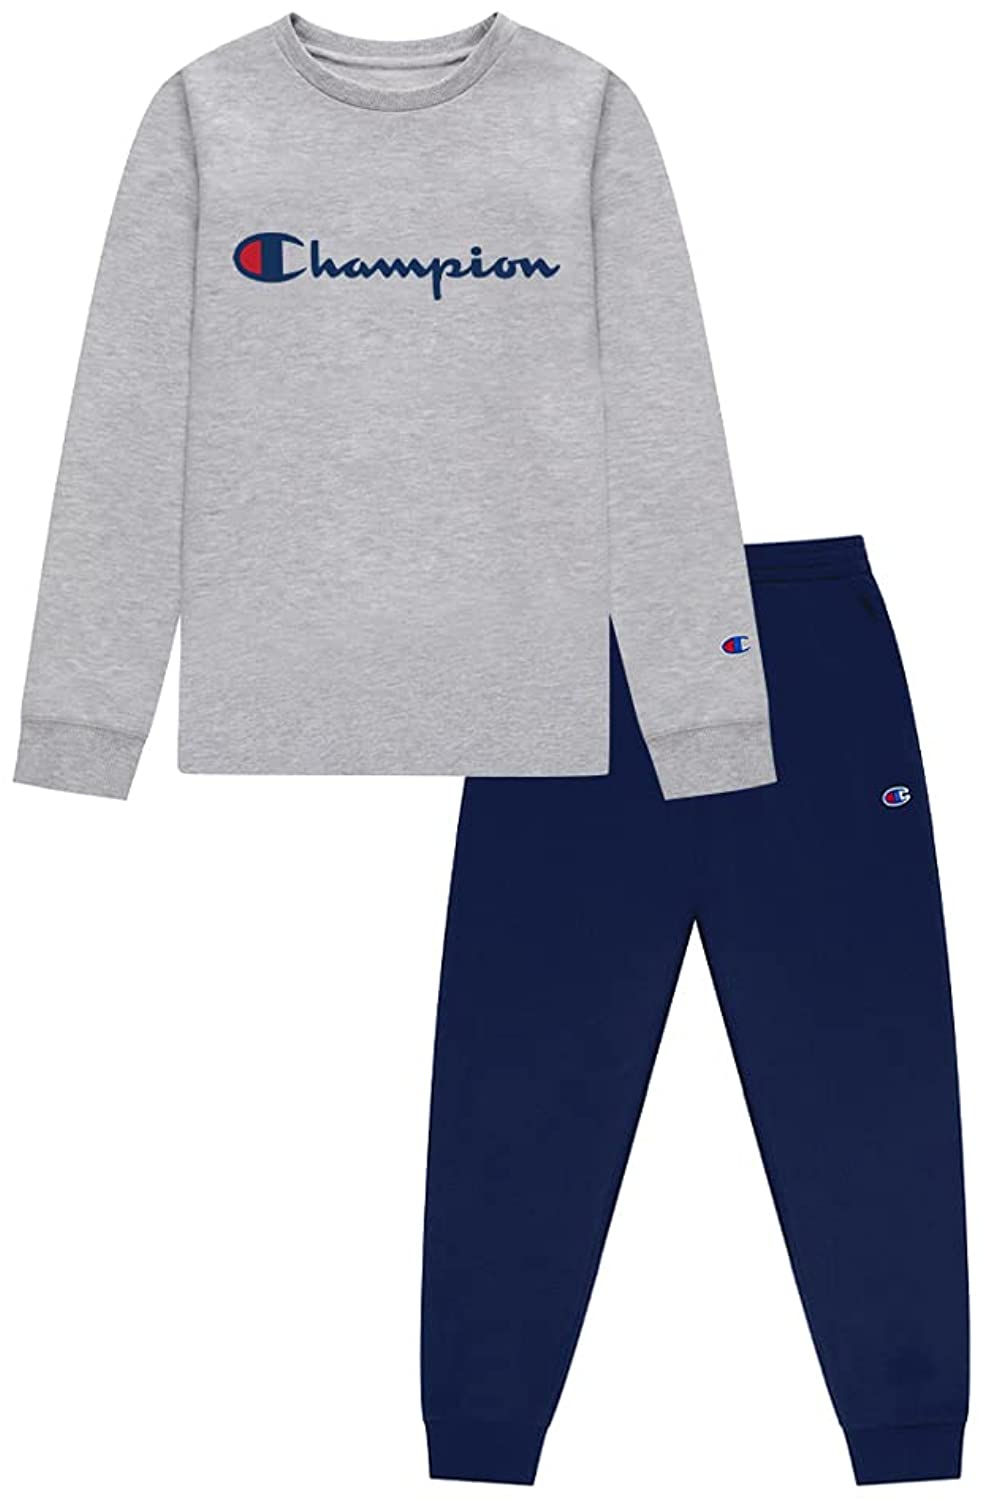 Champion Boys Two Piece Athletic Fleece Top Tricot Bottom Set Kids Clothes 